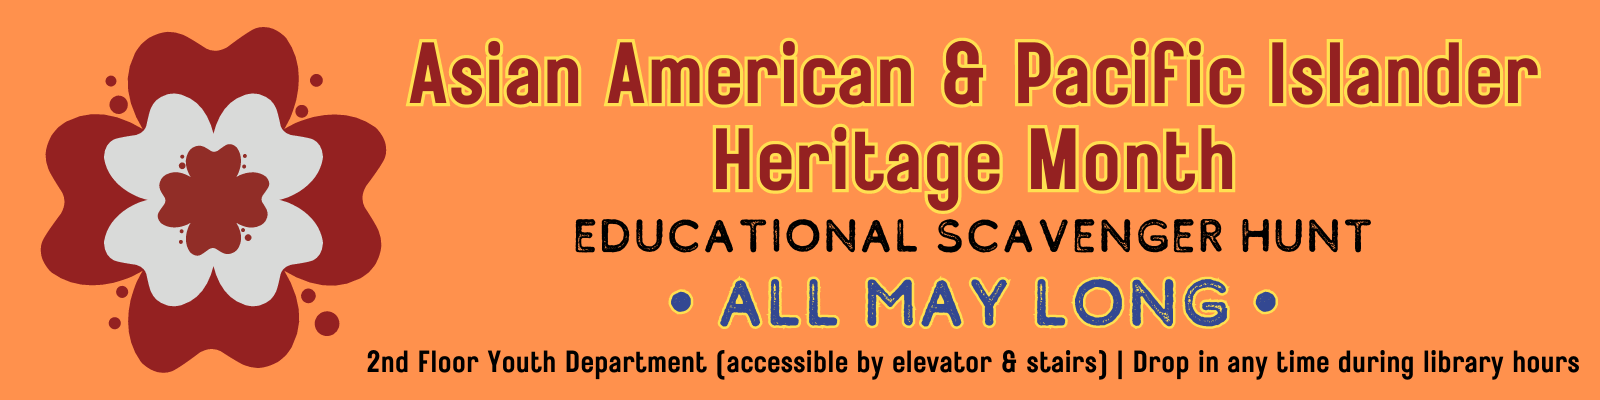 A banner for the Asian American and Pacific Islander Heritage Month Educational Scavenger hunt that everyone can do all May long. Click the banner for more details.